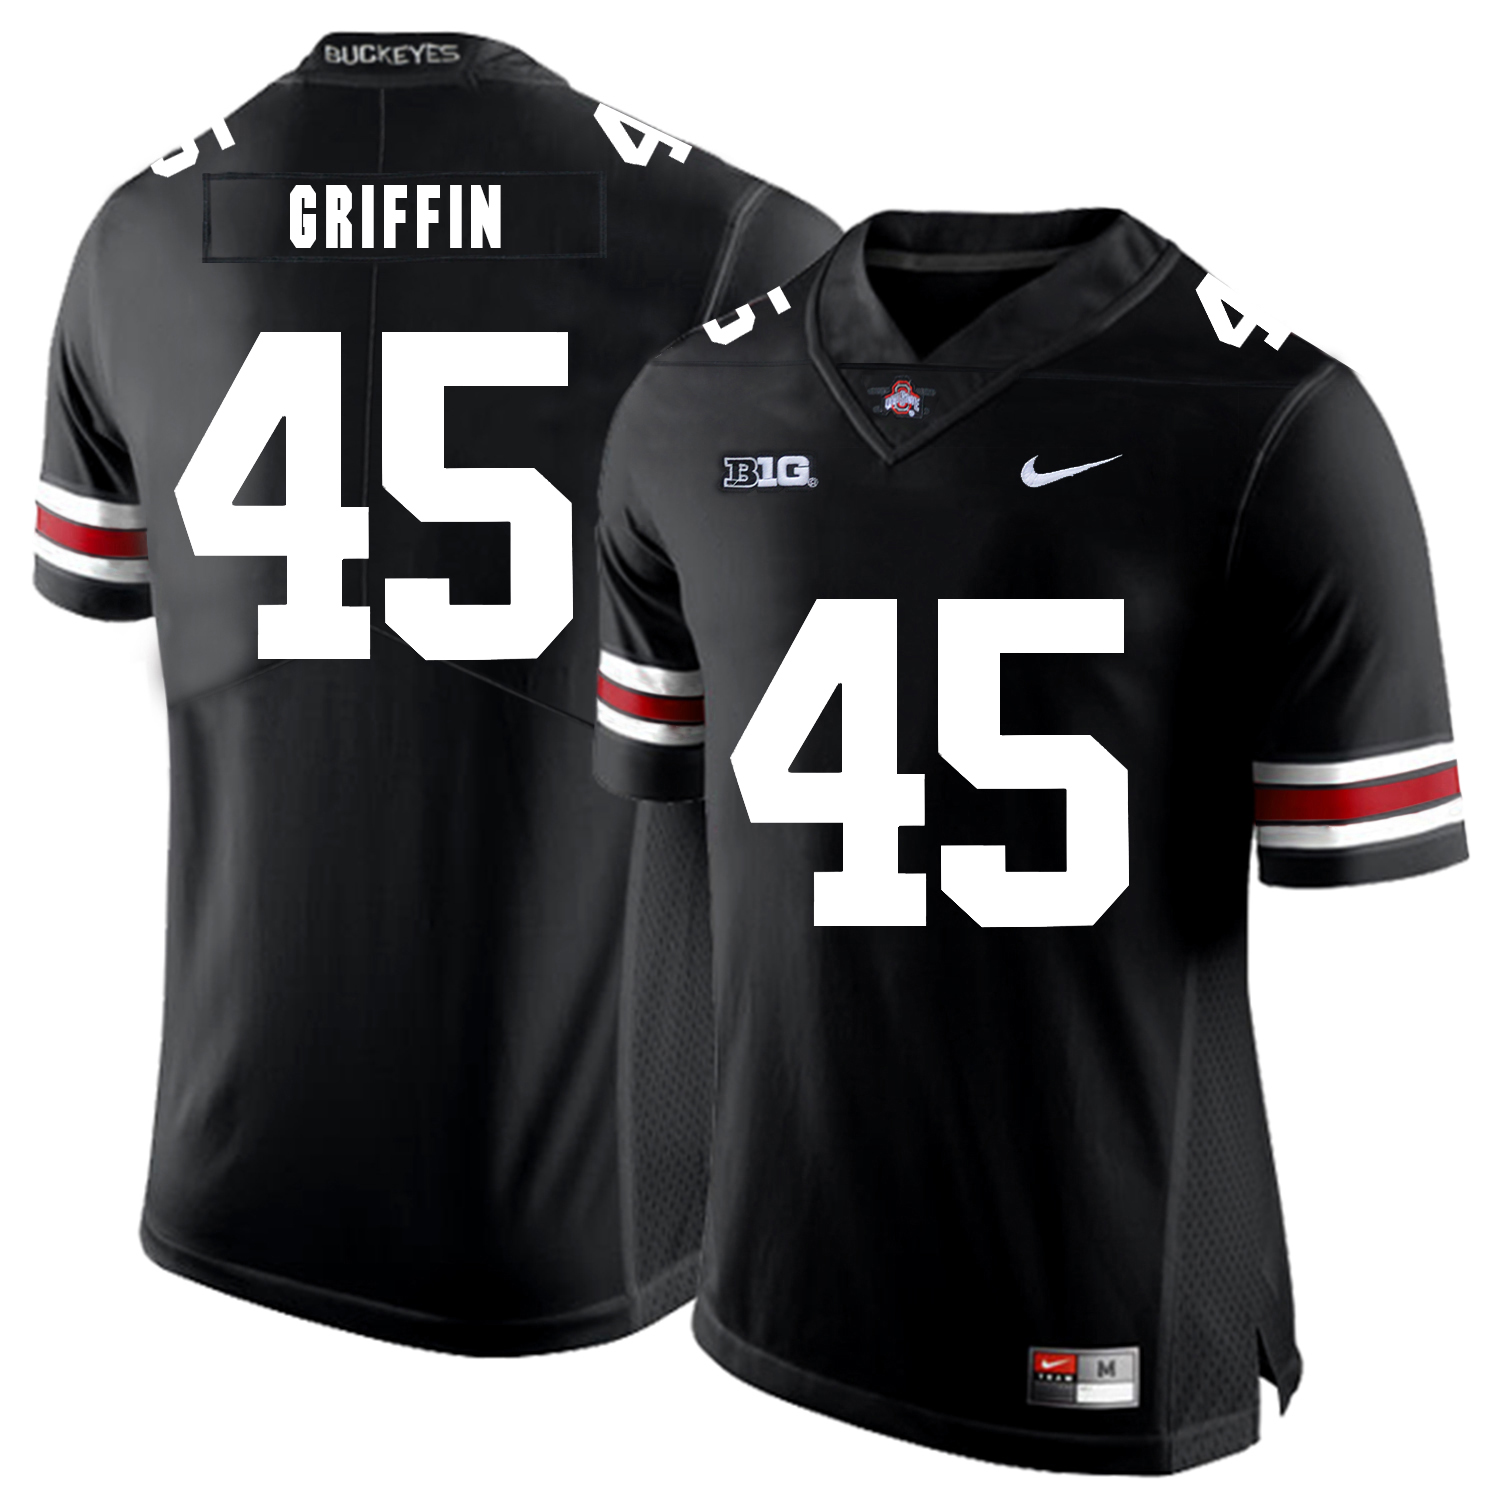 Ohio State Buckeyes 45 Archie Griffin Black Nike College Football Jersey